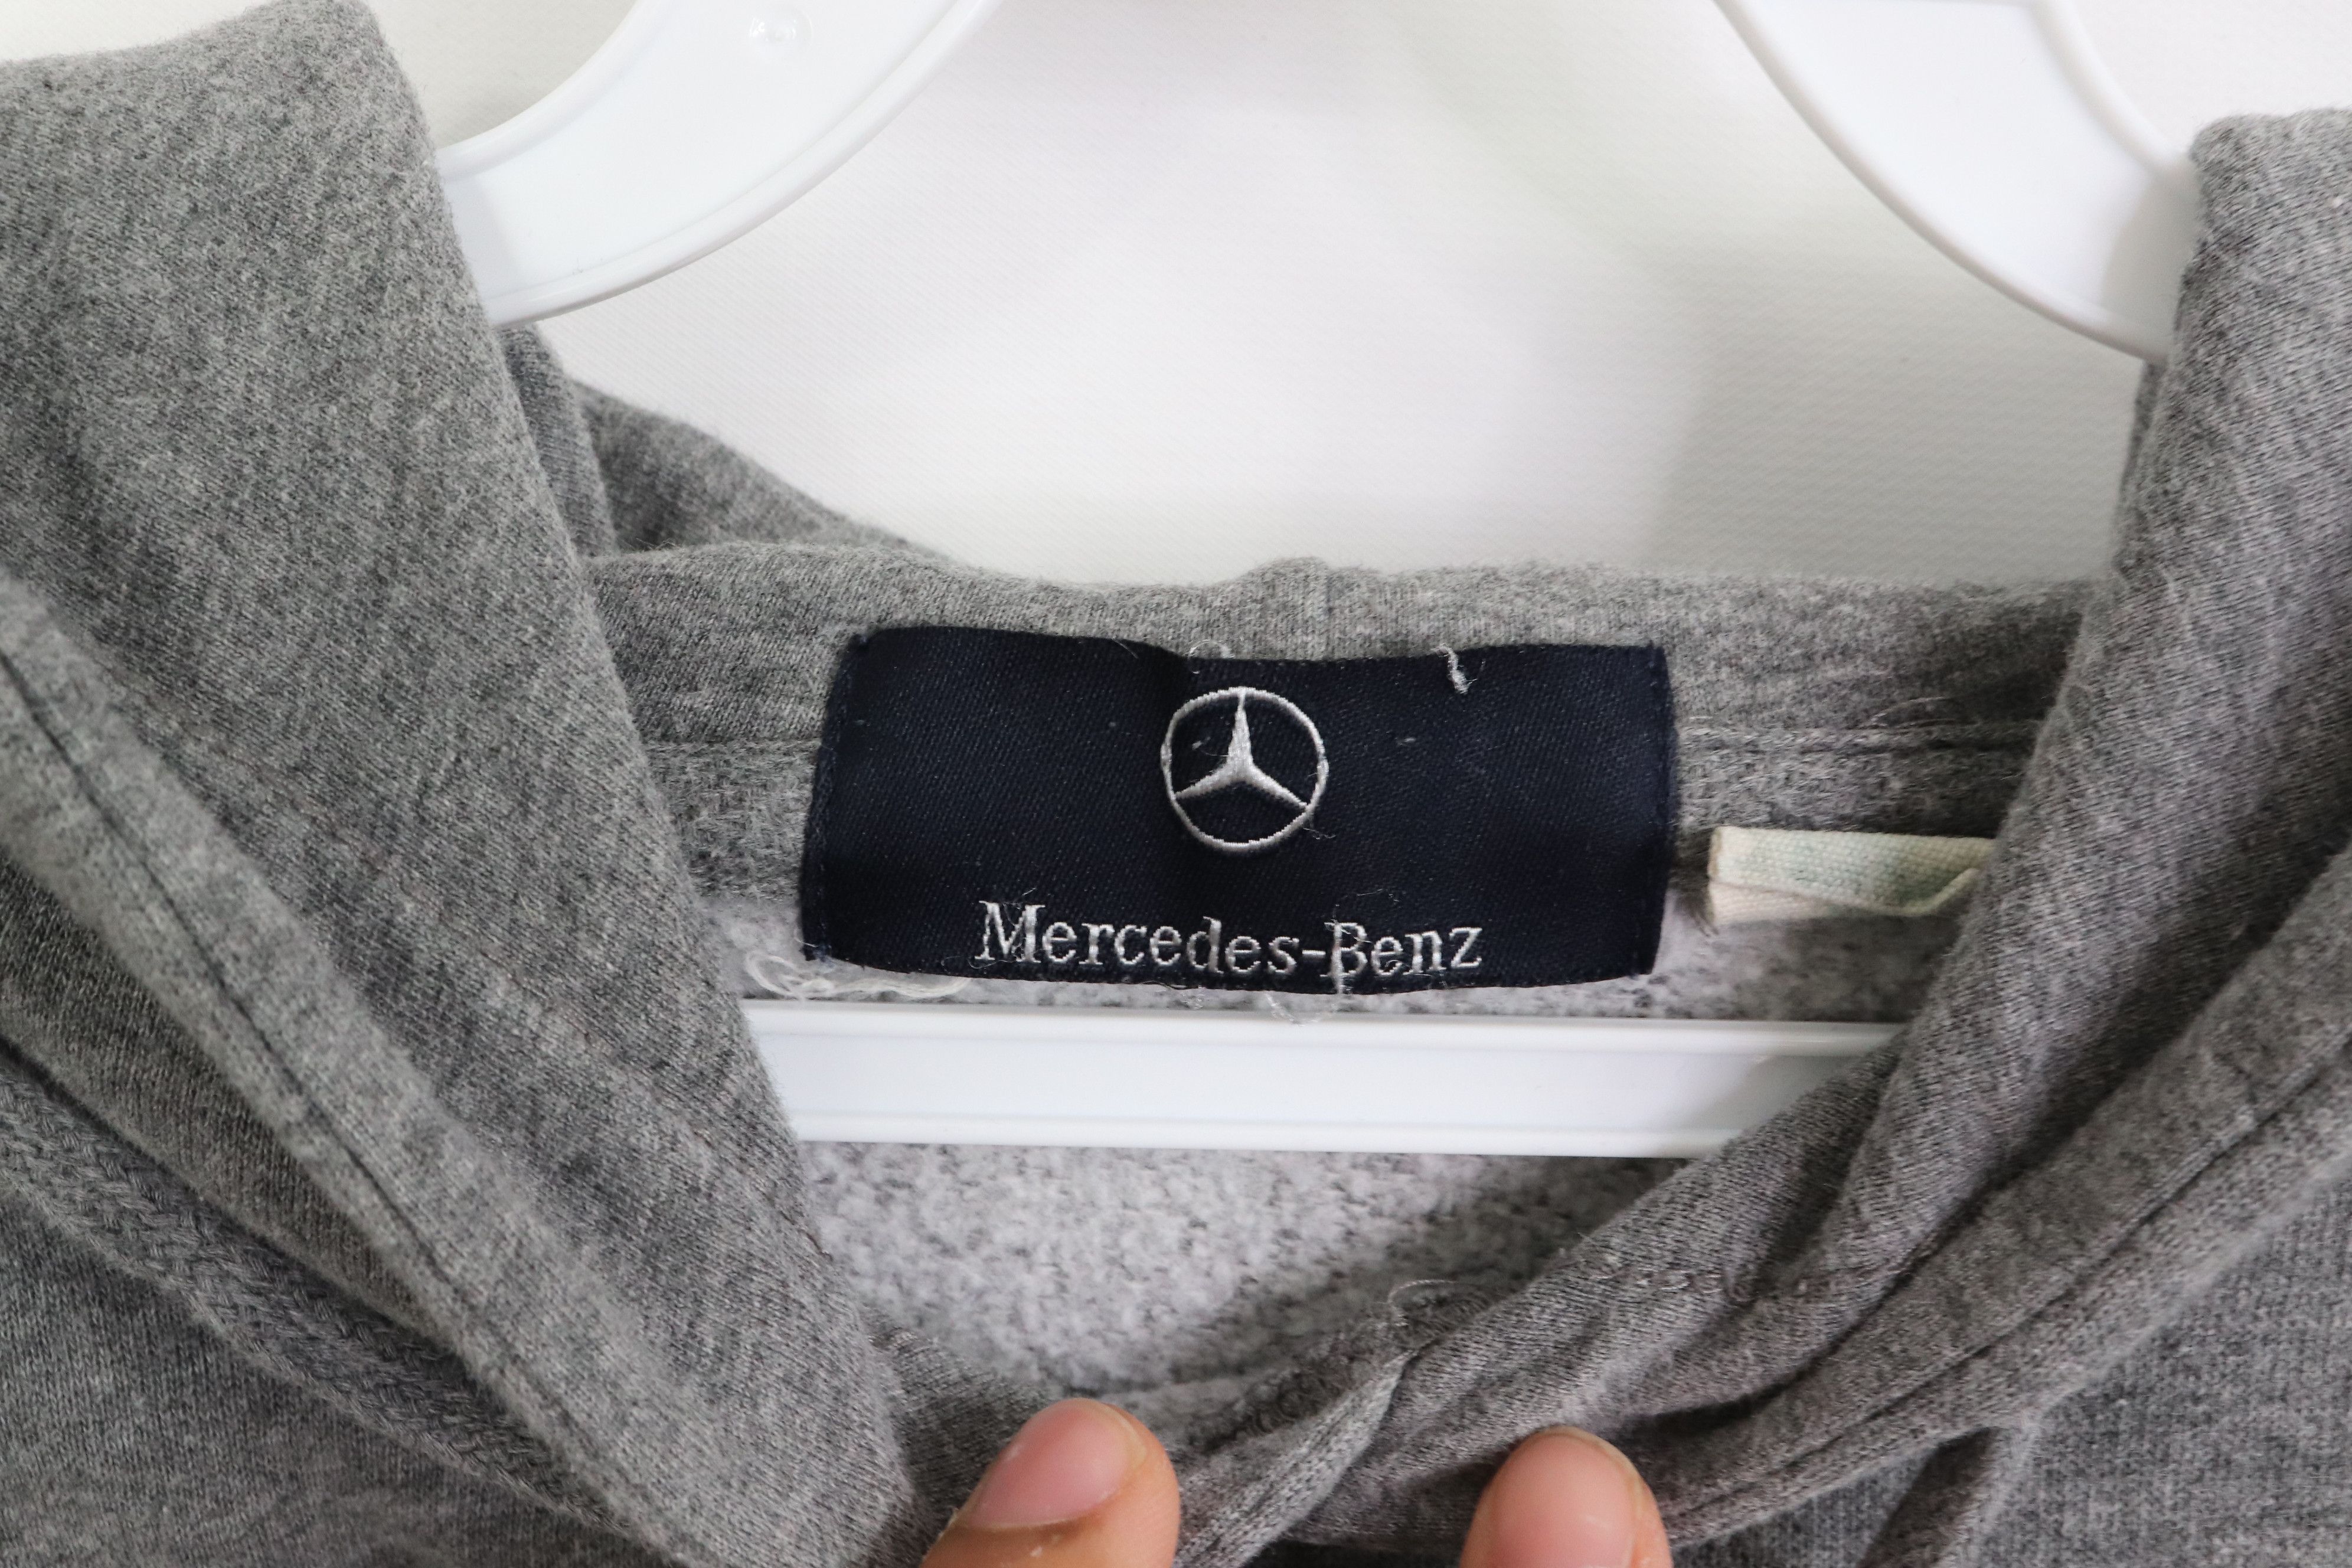 Mercedes Benz Vintage Mercedes Benz Mens XL The Best or Nothing Spell Out Hoodie Sweatshirt Size US XL / EU 56 / 4 - 6 Thumbnail